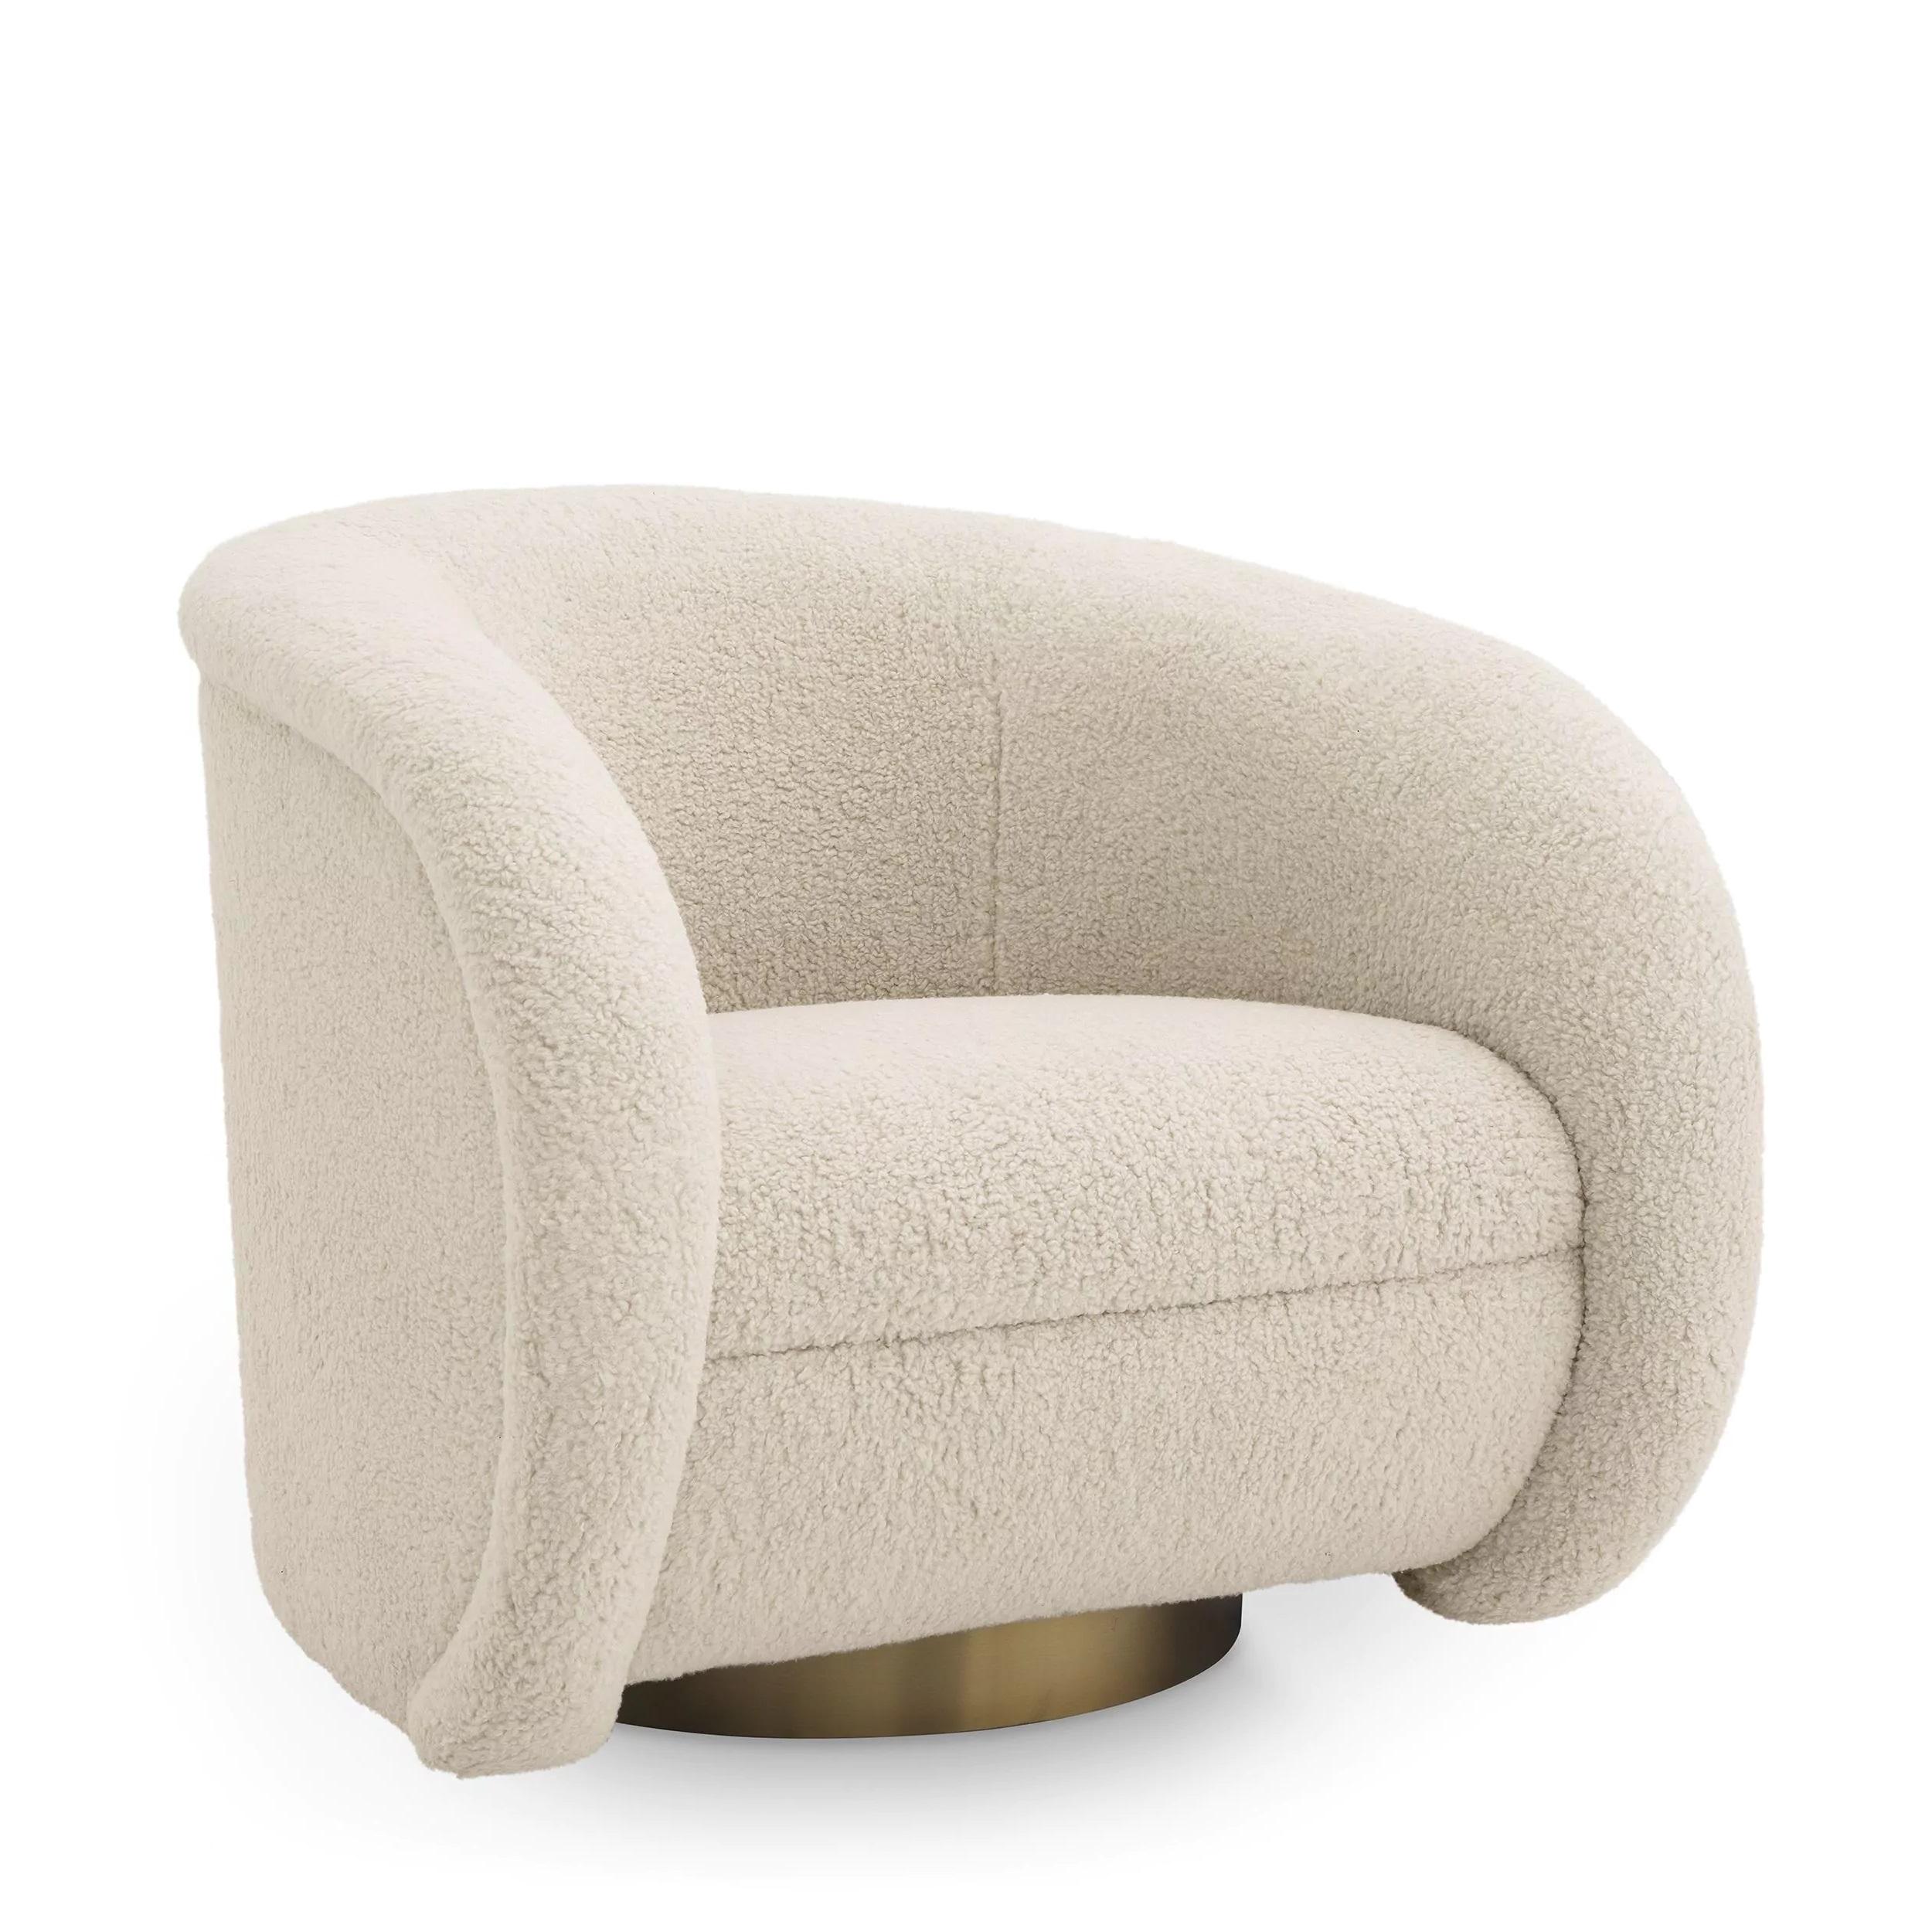 Welcoming and curved swivel armchair in beige bouclé fabric with brass finishes base